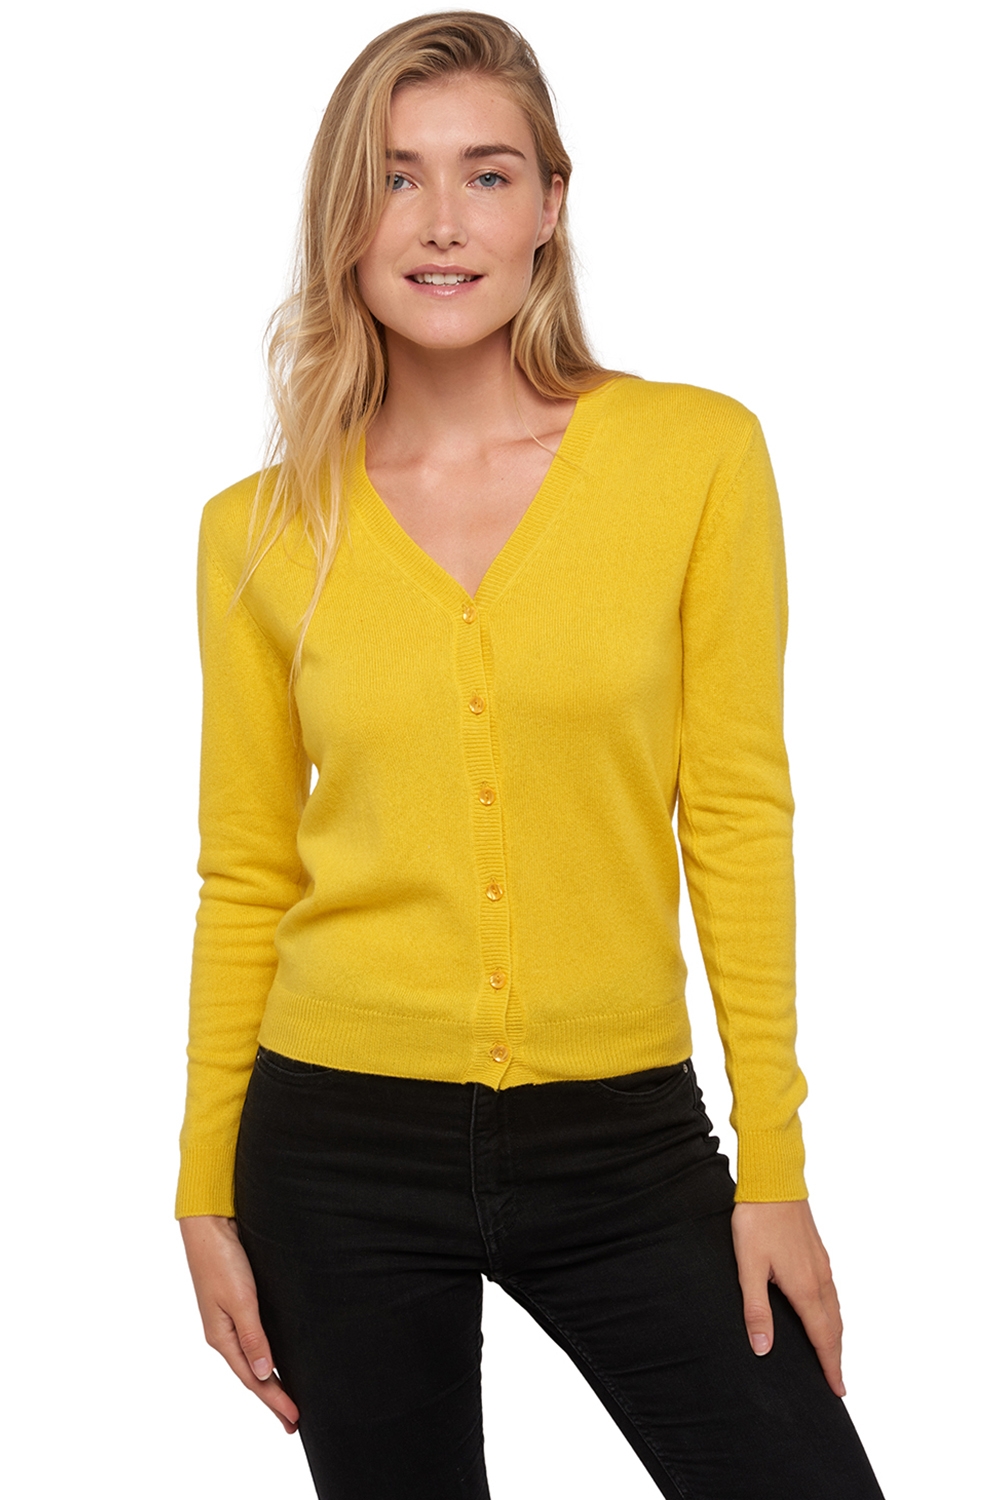 Cashmere ladies basic sweaters at low prices taline sunny yellow m